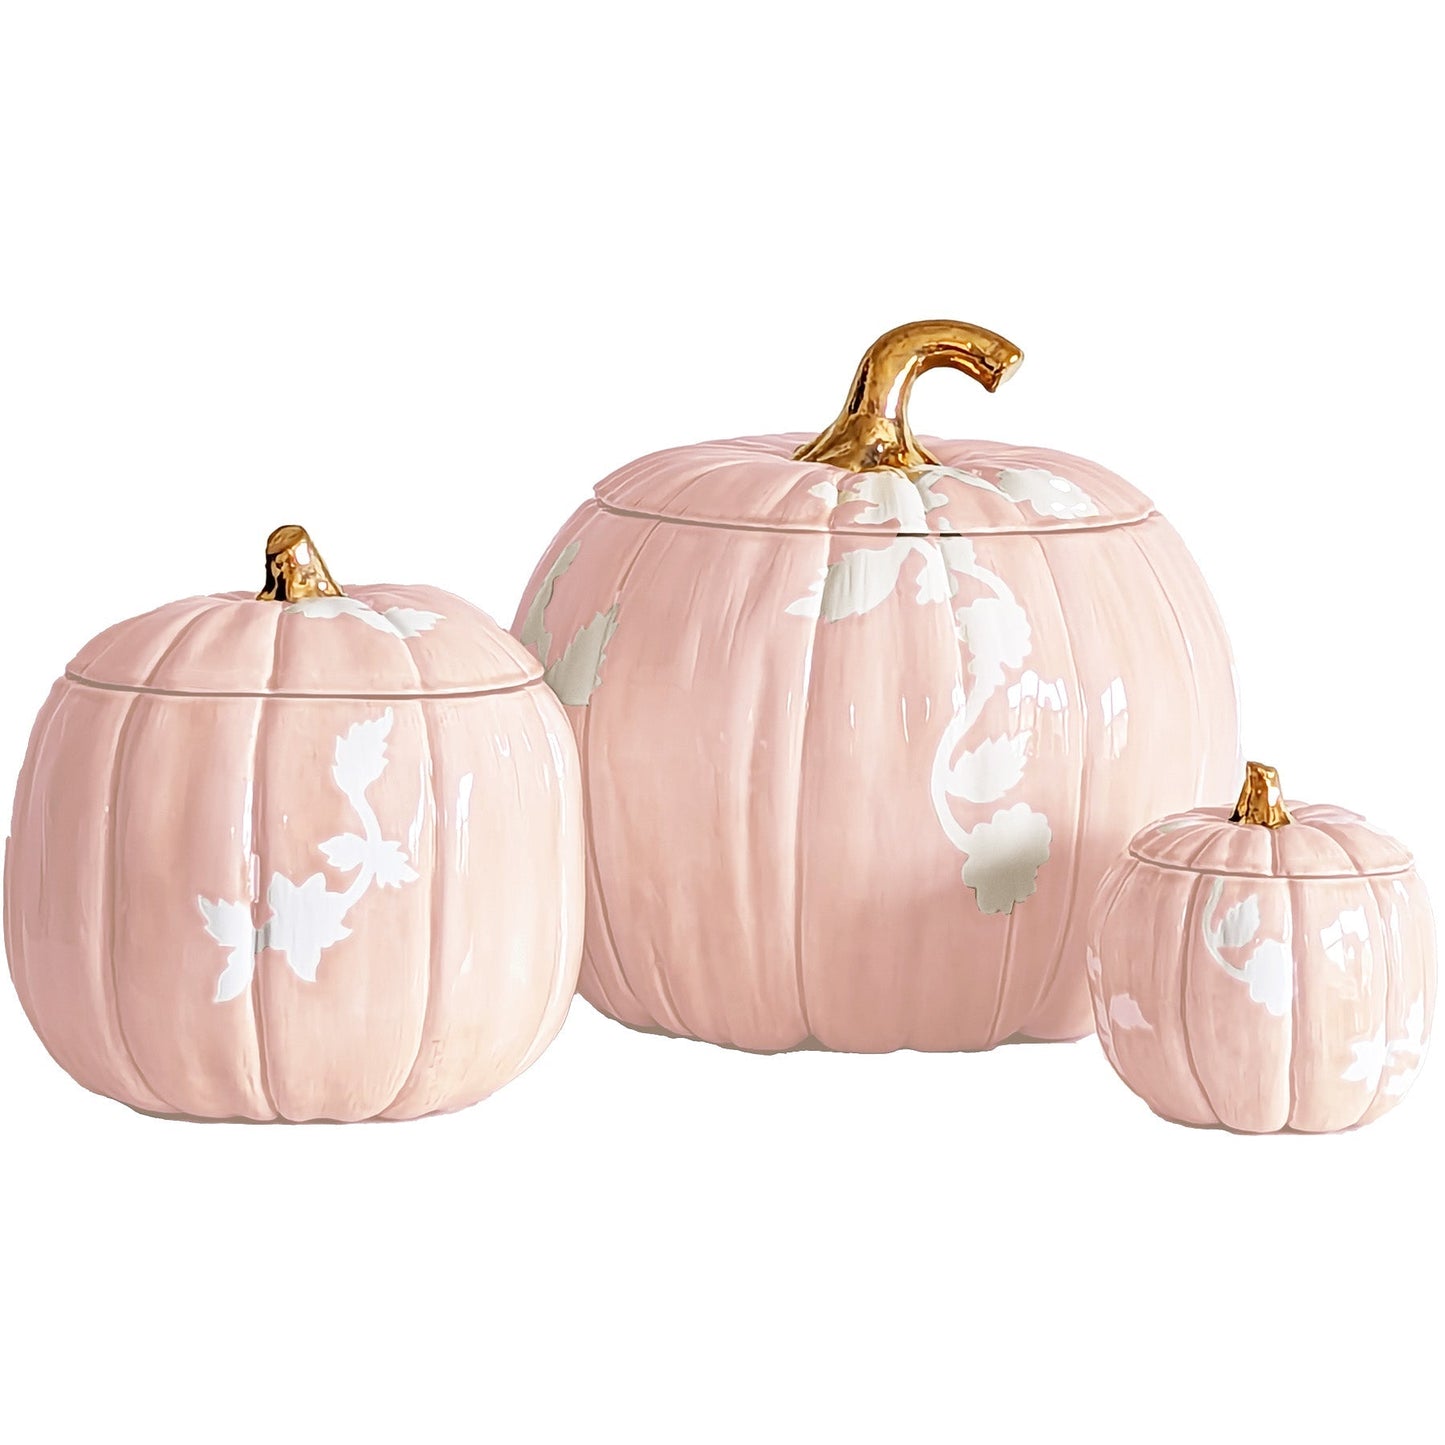 Chinoiserie Pumpkin Jars with 22K Gold Accents in Blush | Wholesale